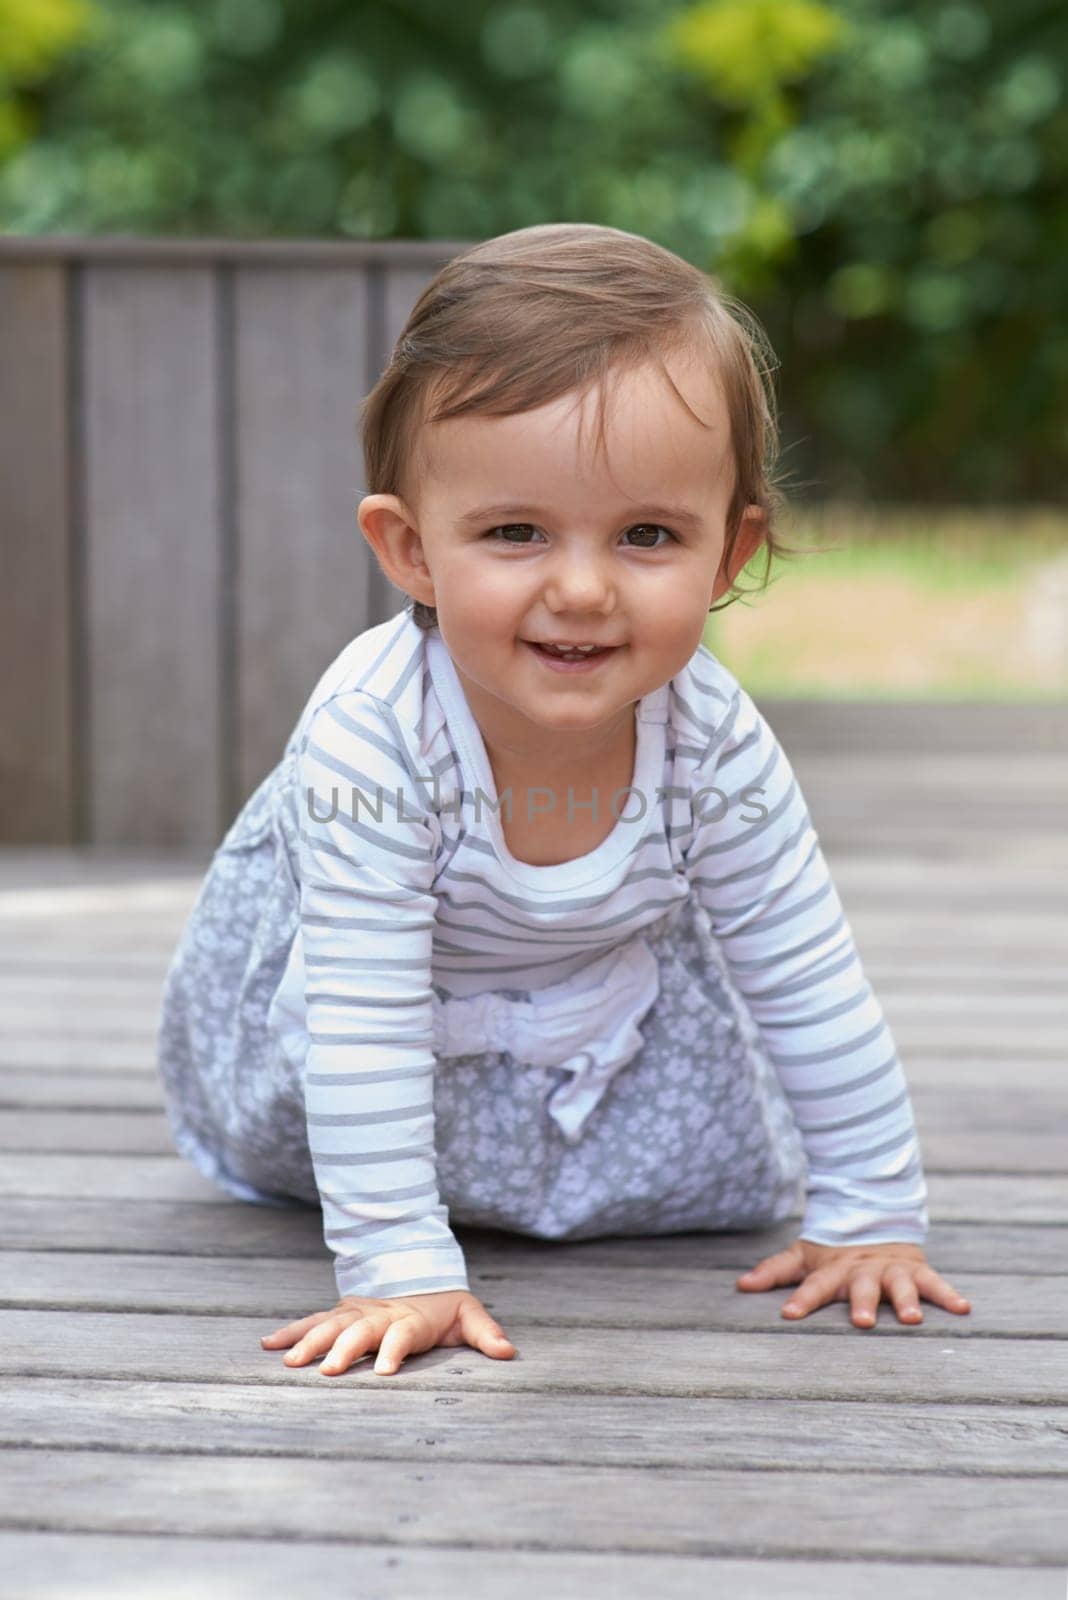 Baby girl, crawling outside and portrait on floor, child development and growth with sensory coordination. Girl, cognition and healthy in good mood, childhood or balance with arms, kid or adorable.